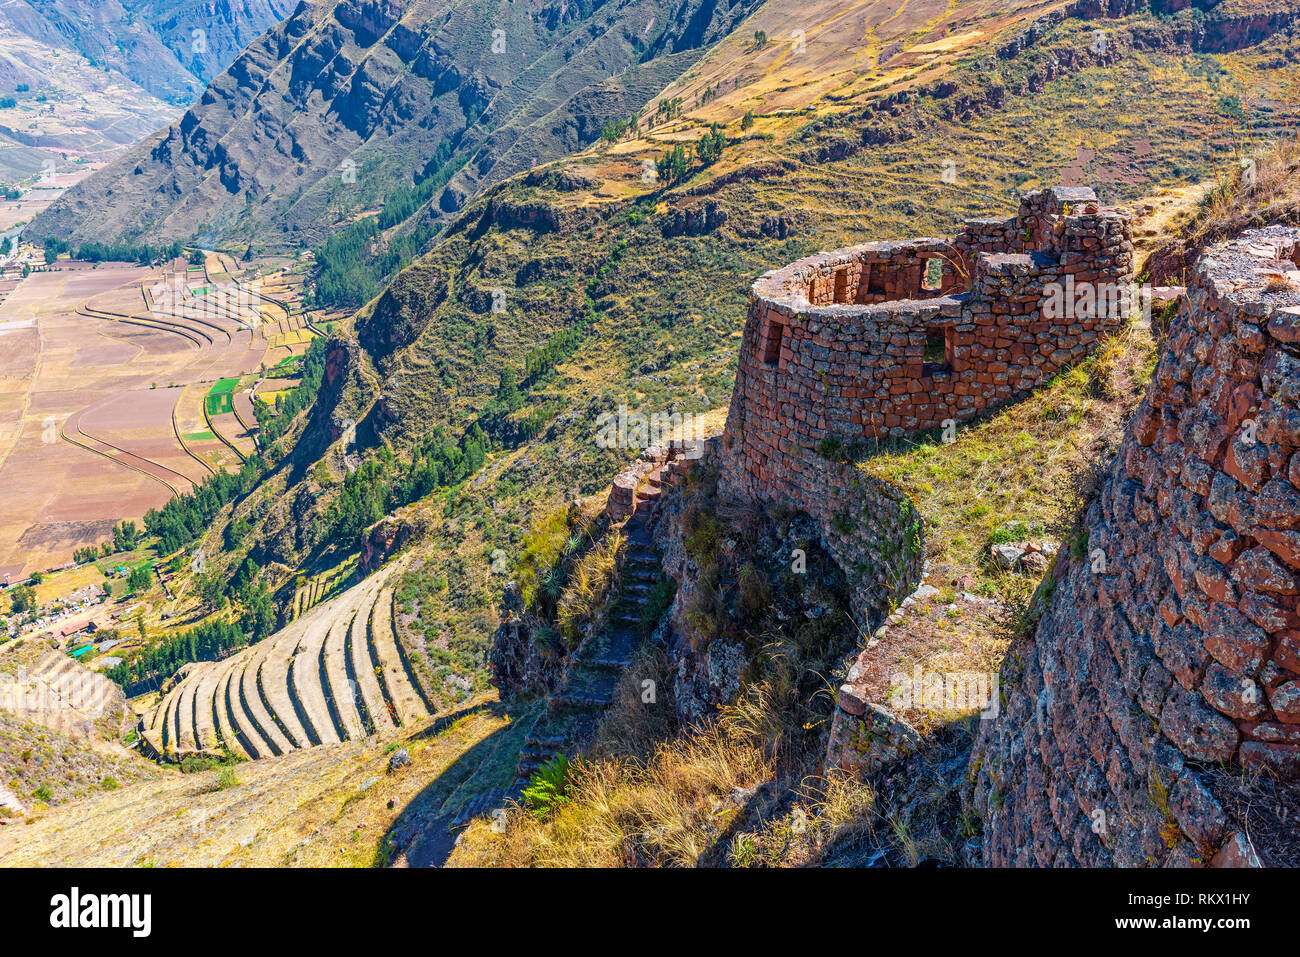 The inca ruins of Pisac with its terraced fields near the city of Cusco, Peru. Stock Photo